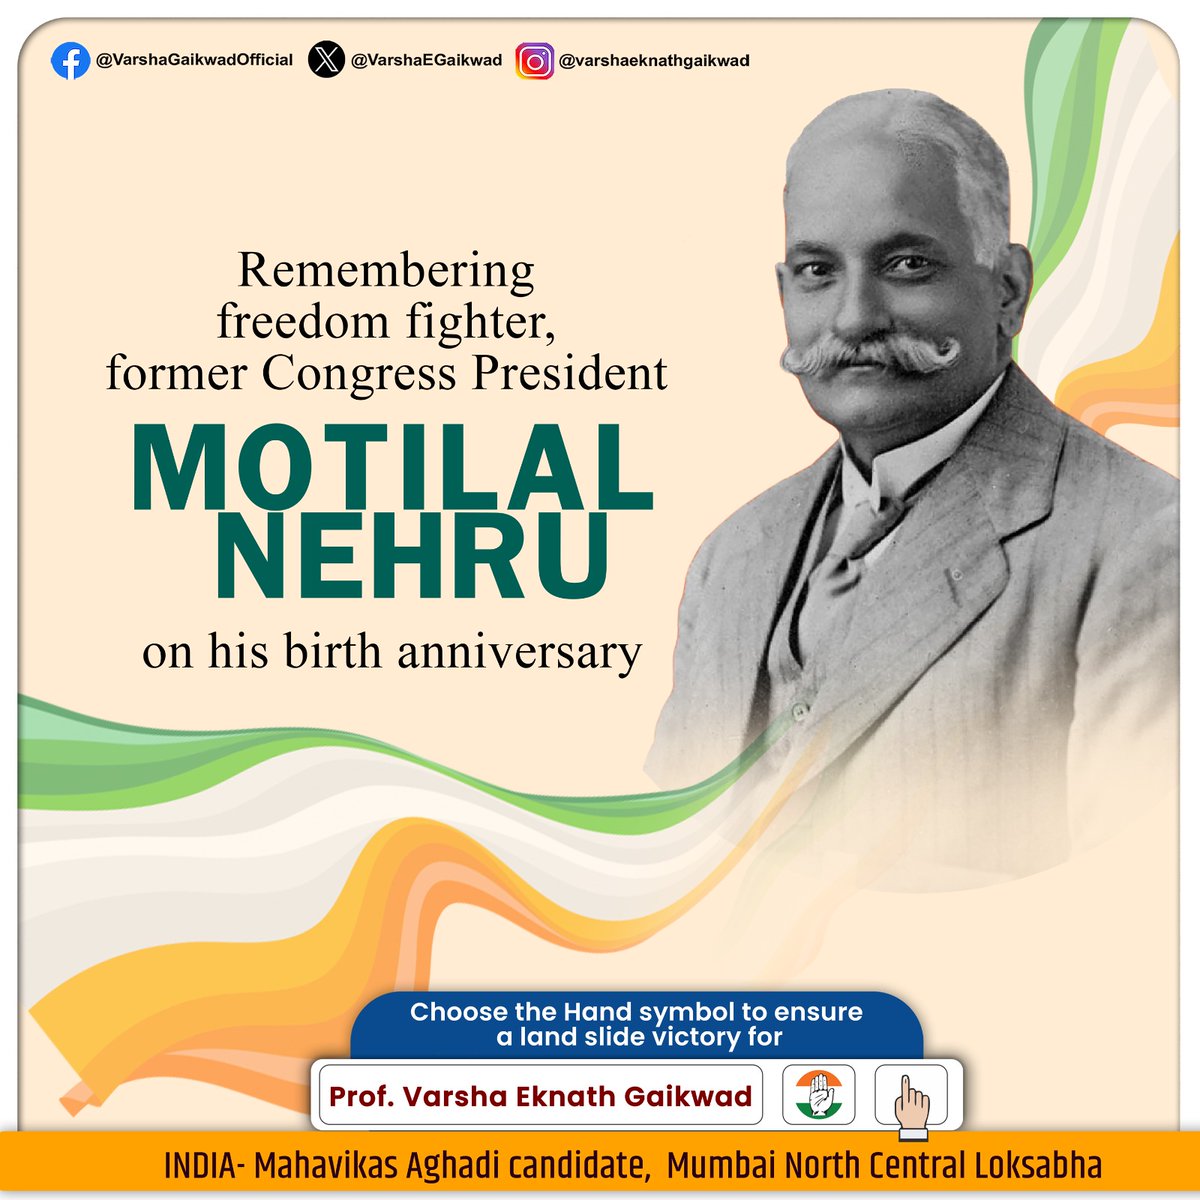 Motilal Nehru - a freedom fighter, great orator, prominent lawyer, former Congress president and someone whose political legacy lives on, my humble tributes on his birth anniversary.